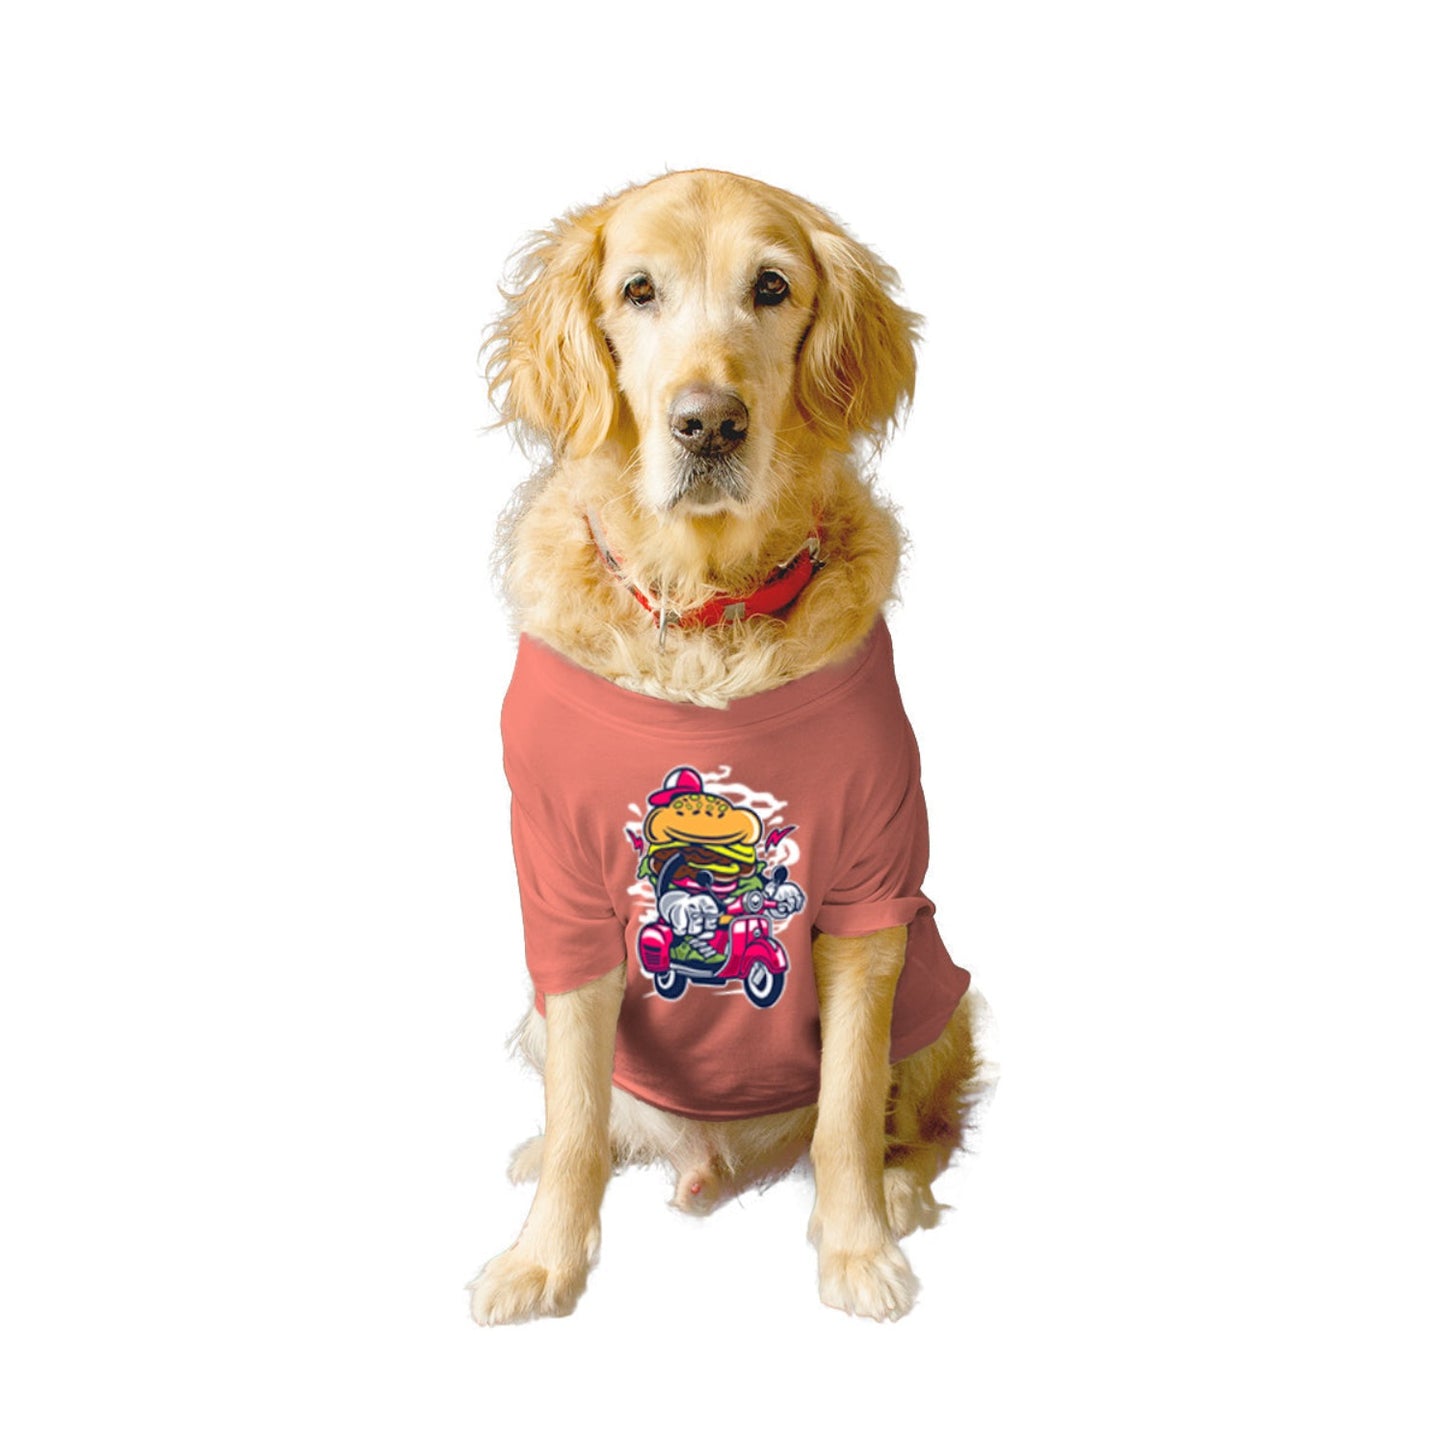 Ruse XX-Small (Chihuahuas, Papillons) / Salmon Ruse Basic Crew Neck "Burger Scooter" Printed Half Sleeves Dog Tee